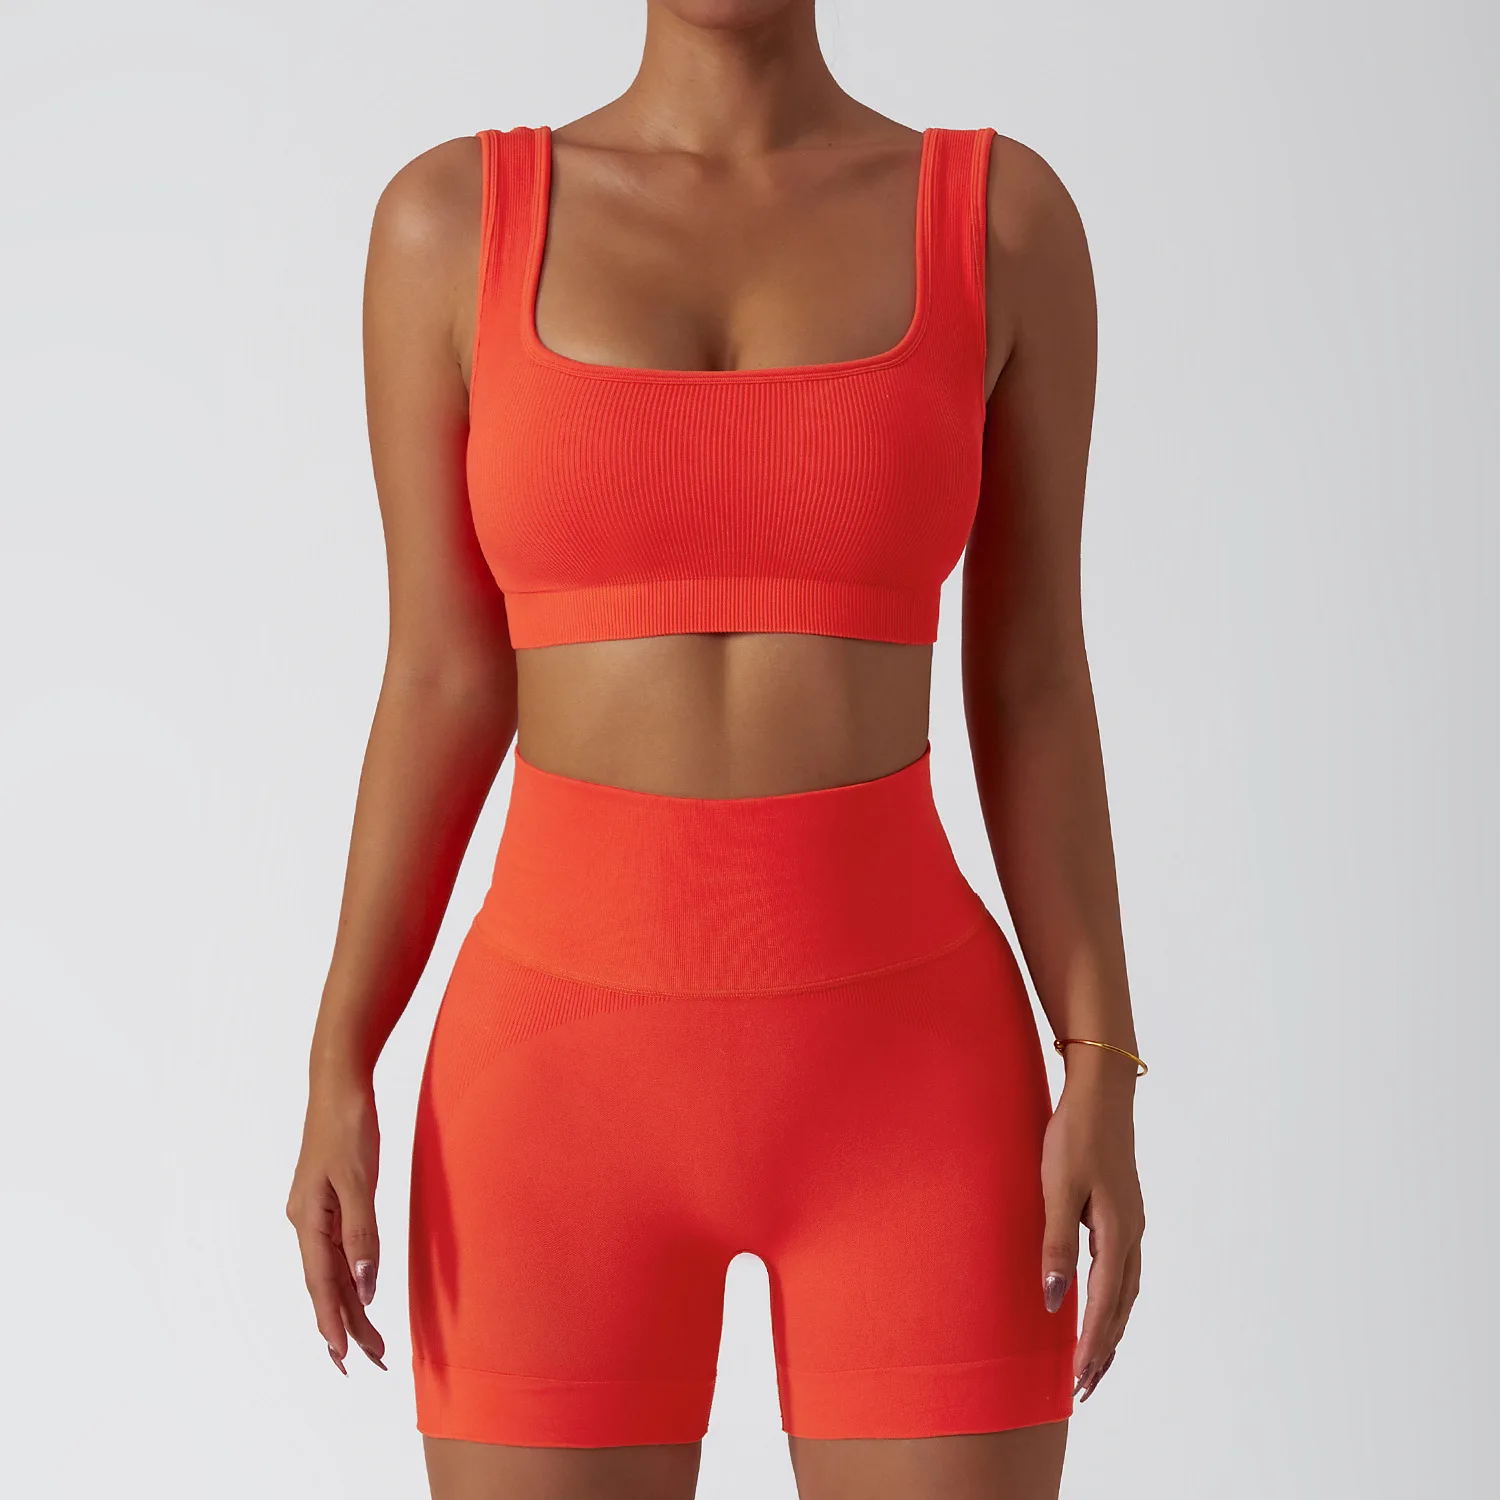 Orange Sports Sets Semaless Yoga Sets Women High Waisted Sports Shorts Sexy Fitness Bra Women Workout Suit Gym Sets for Women